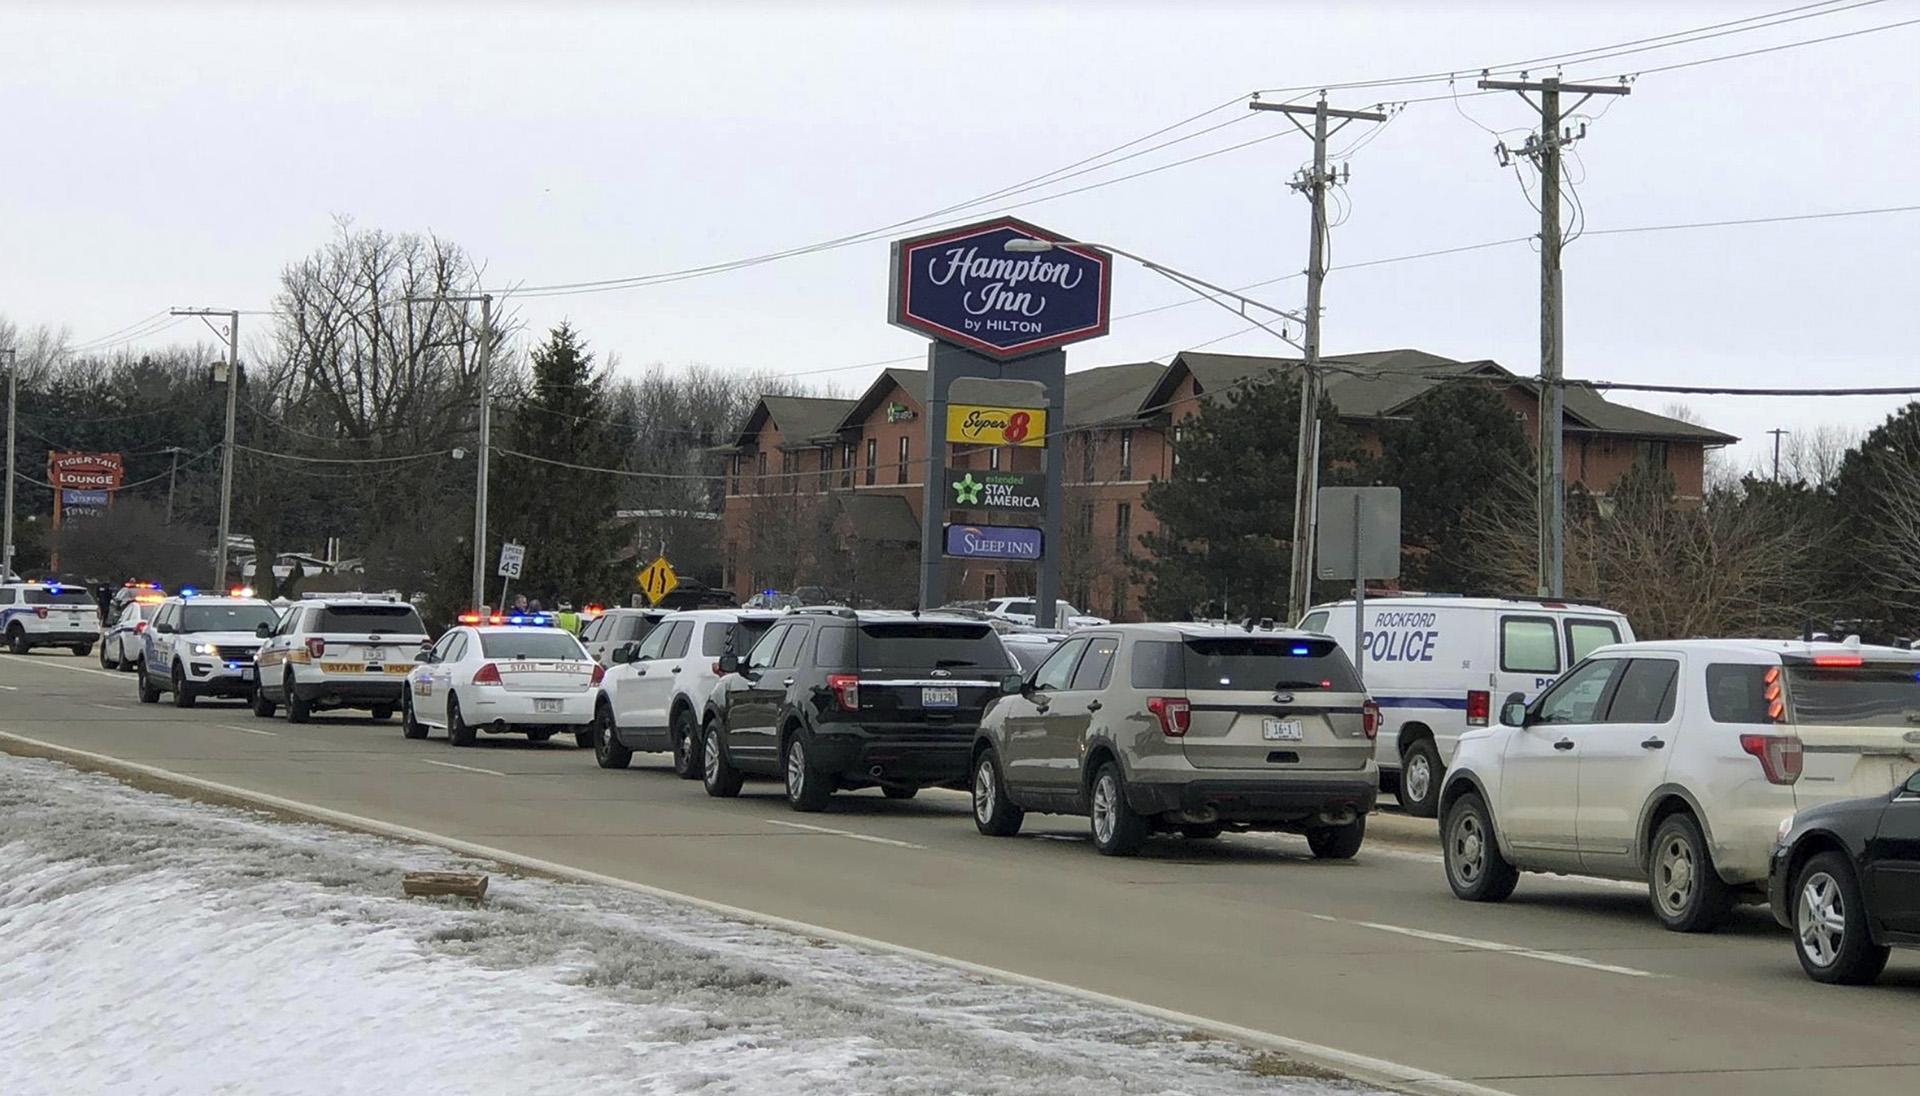 Area law enforcement vehicles gather near the scene of a shooting in Rockford, Ill., Thursday, March 7, 2019. (Ken DeCoster / Rockford Register Star via AP)